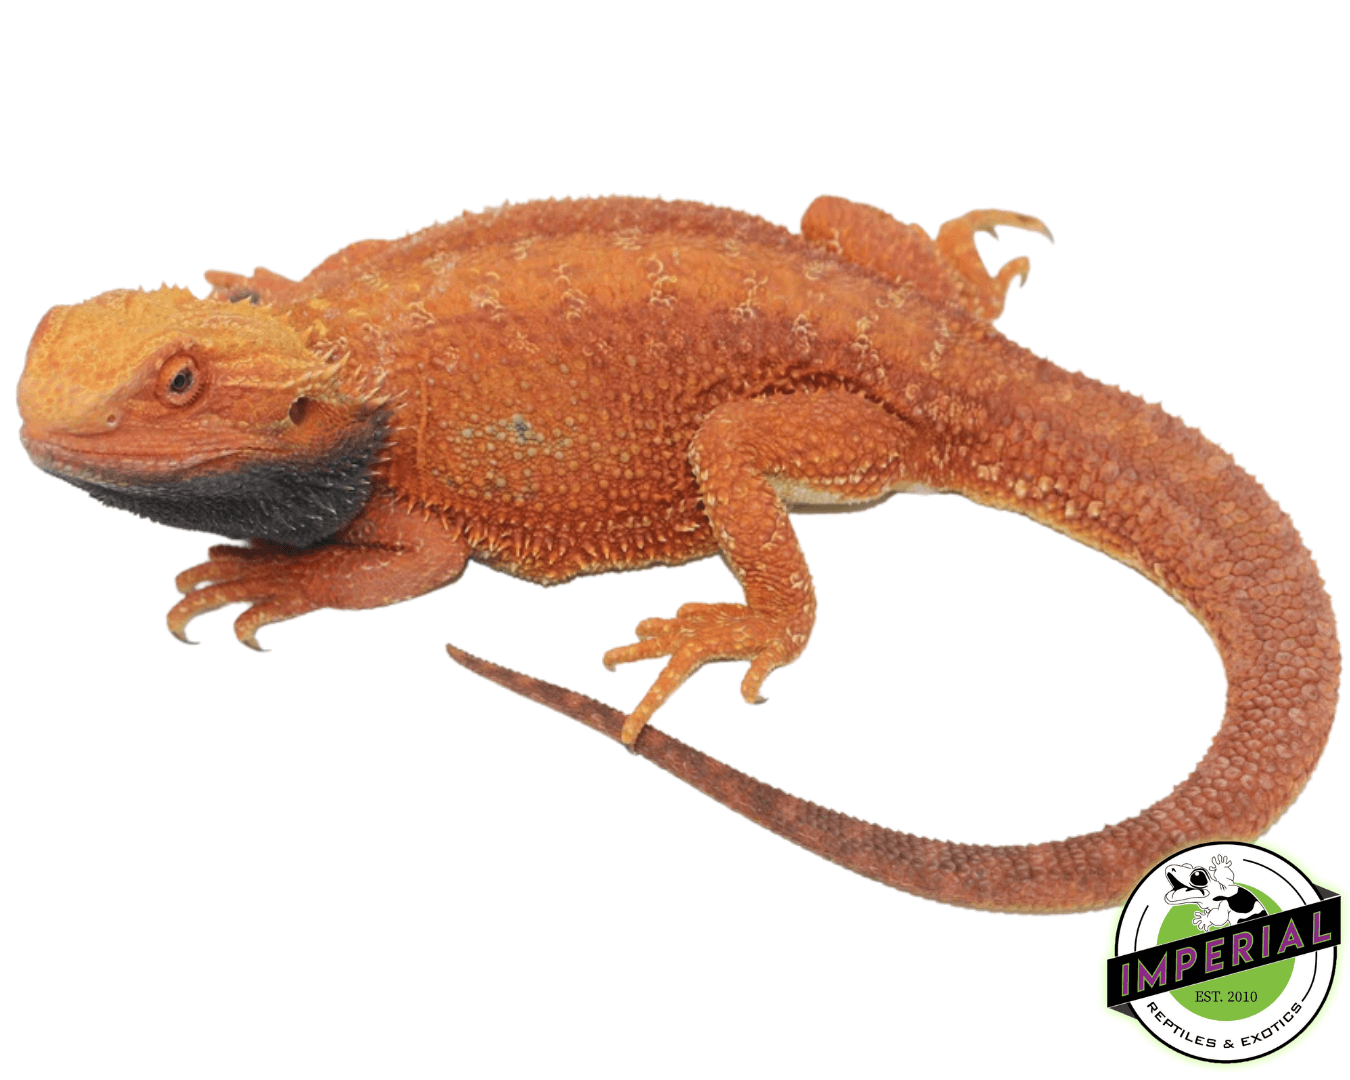 adult red bearded dragon for sale, buy reptiles online